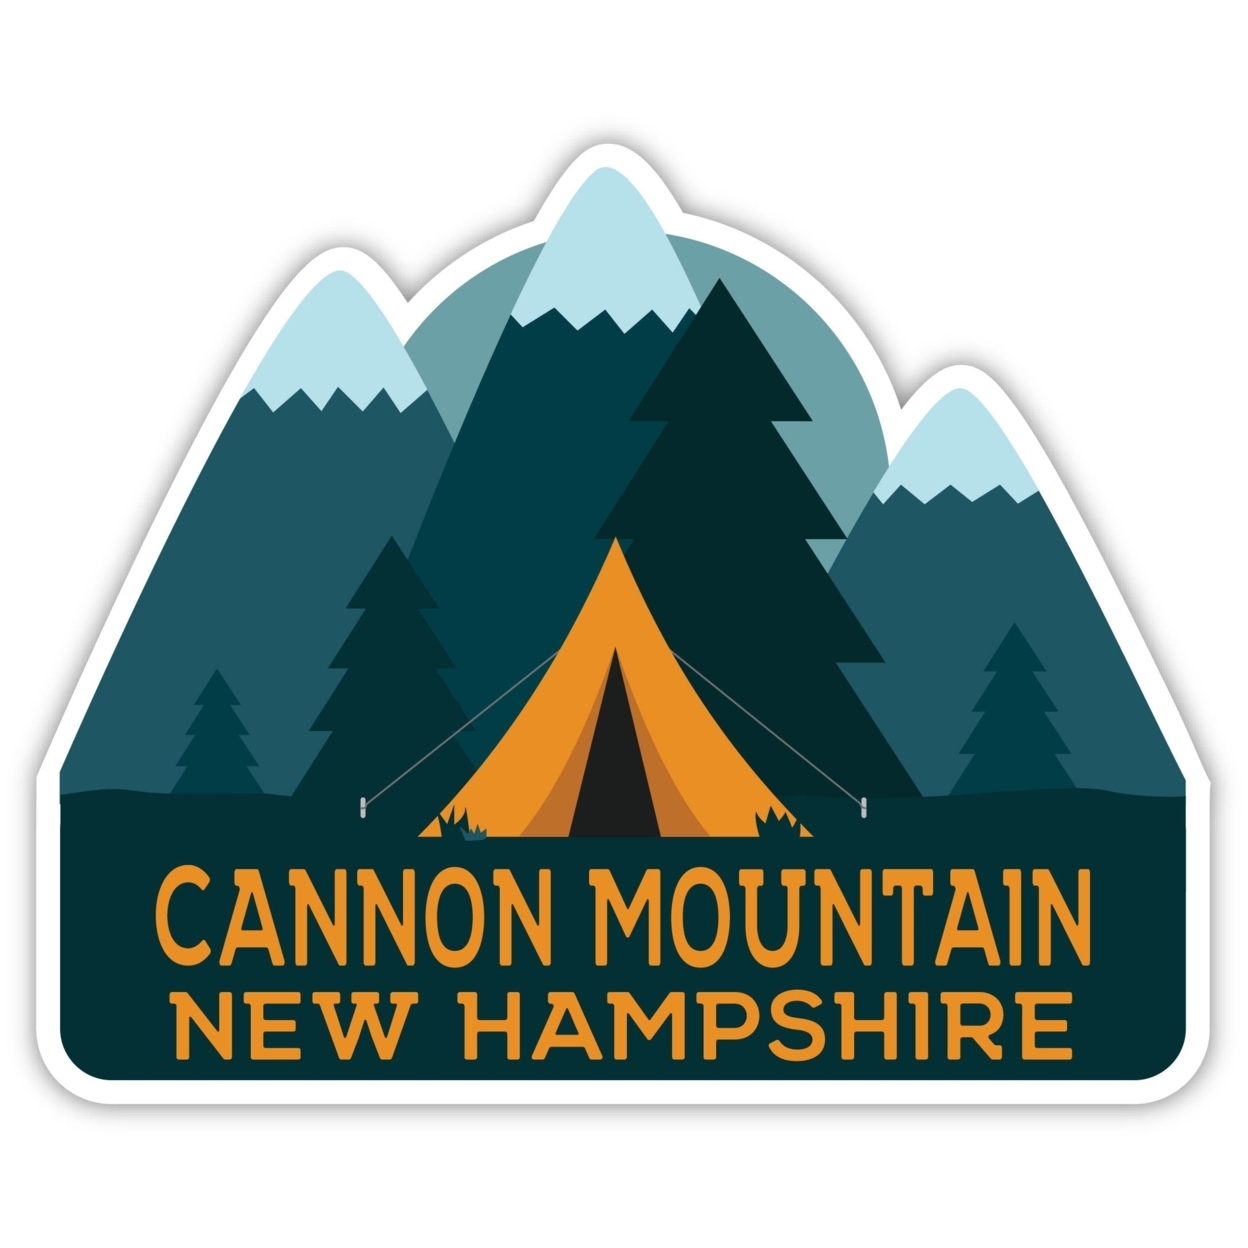 Cannon Mountain New Hampshire Souvenir Decorative Stickers (Choose Theme And Size) - 4-Pack, 12-Inch, Tent